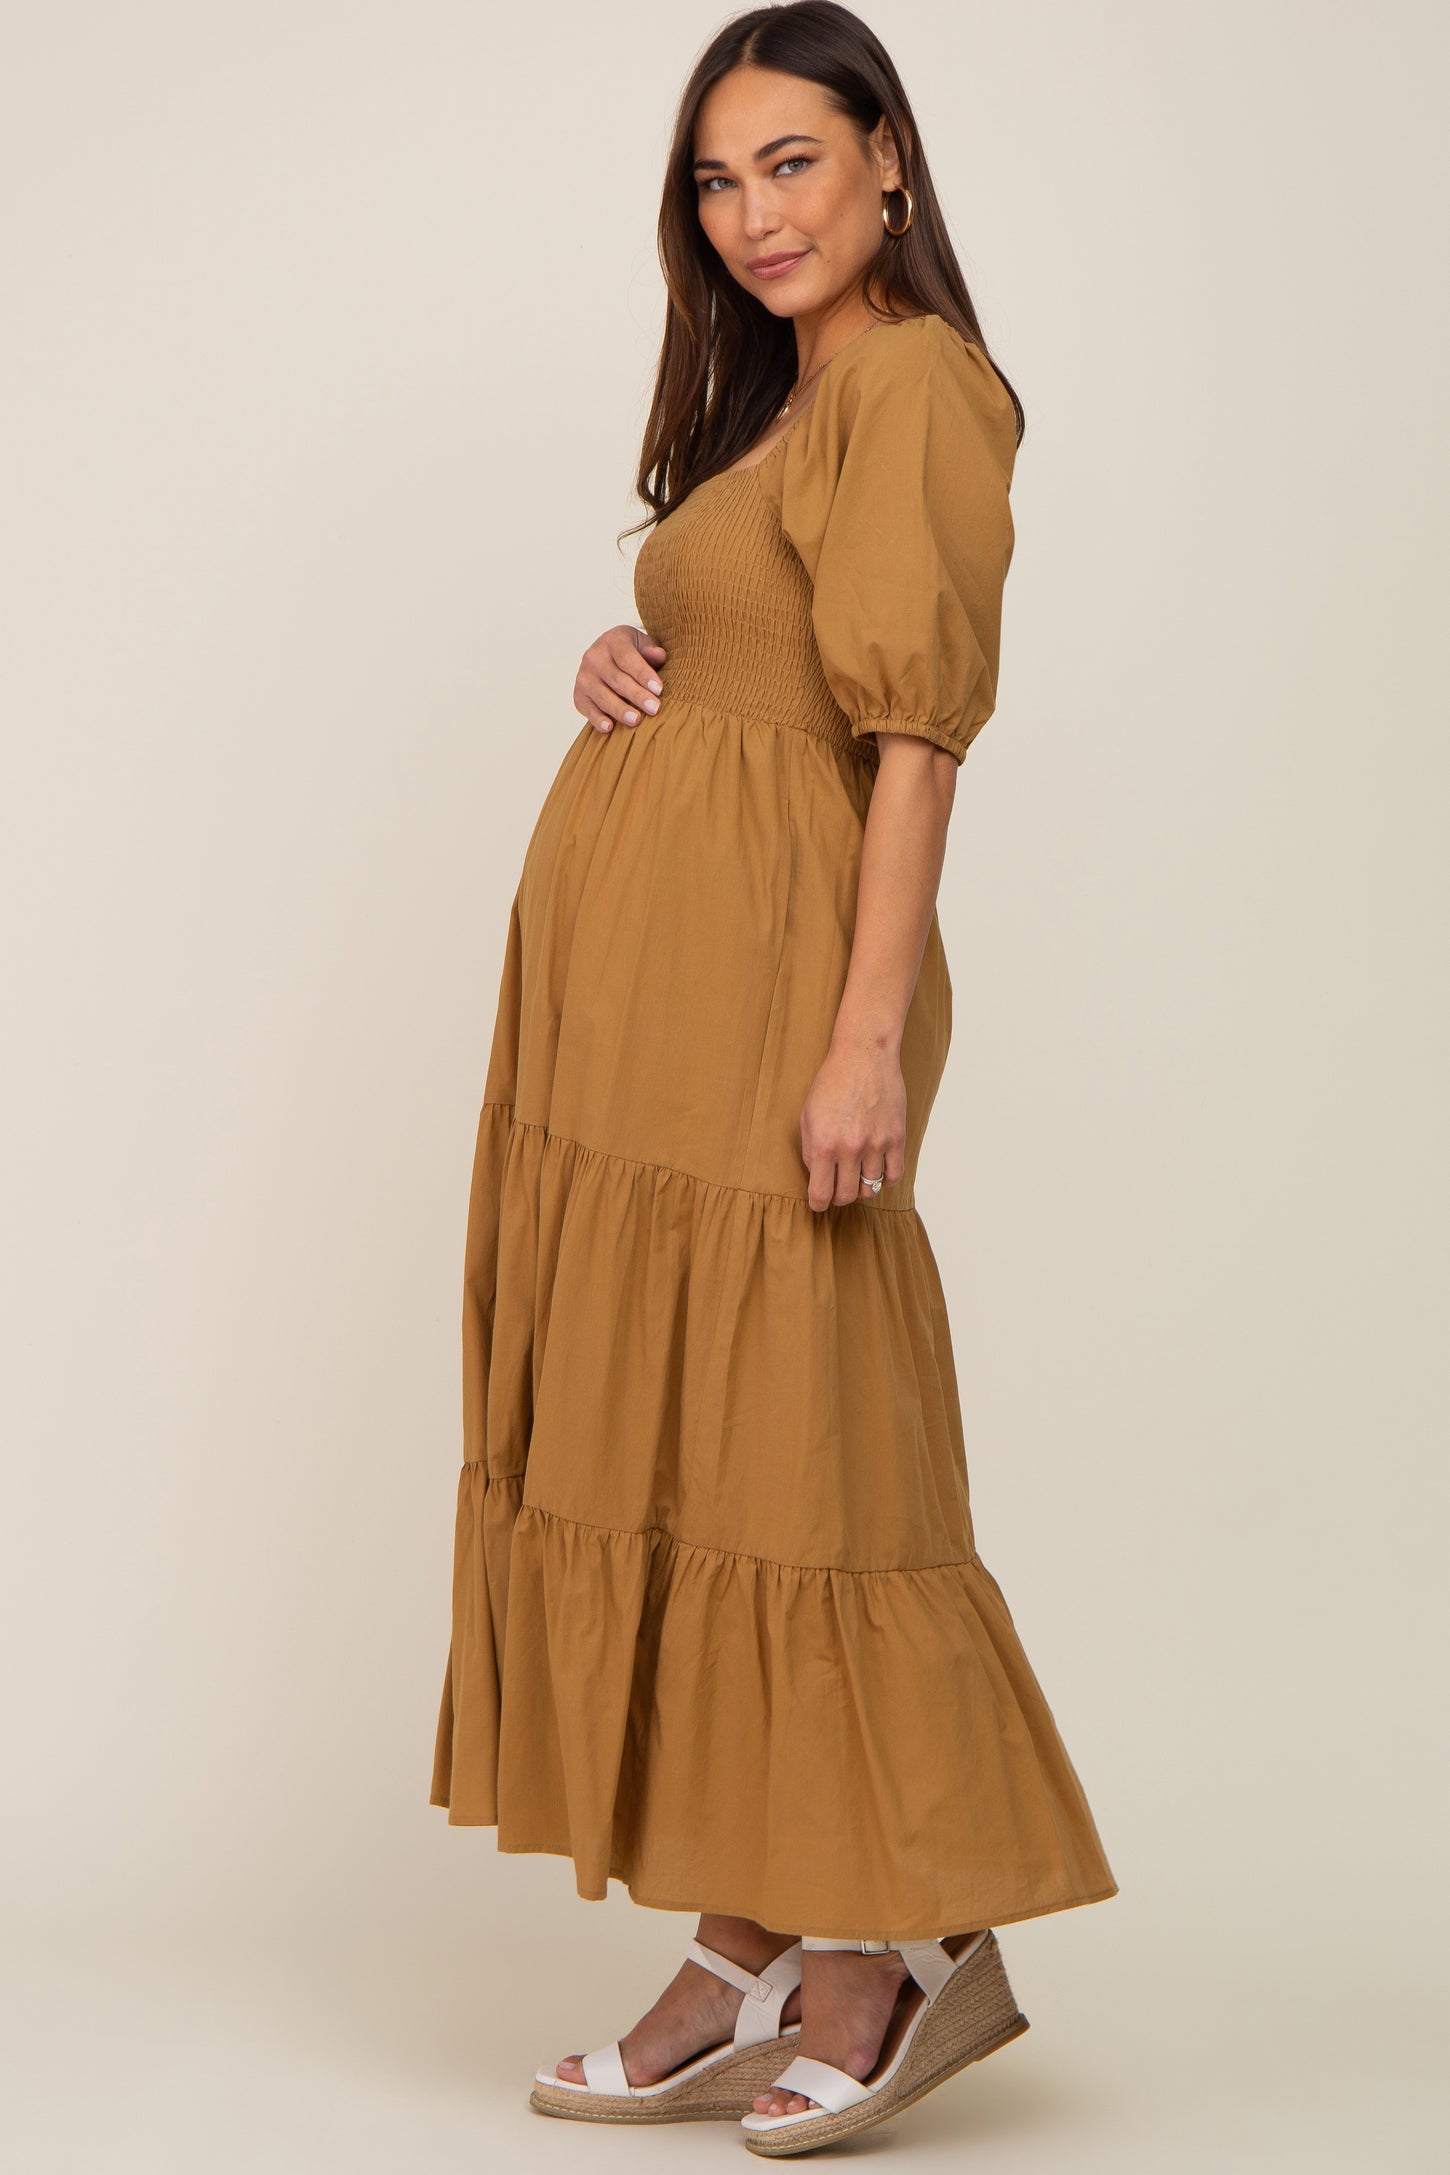 Camel Square Neck Smocked Tiered Maternity Maxi Dress